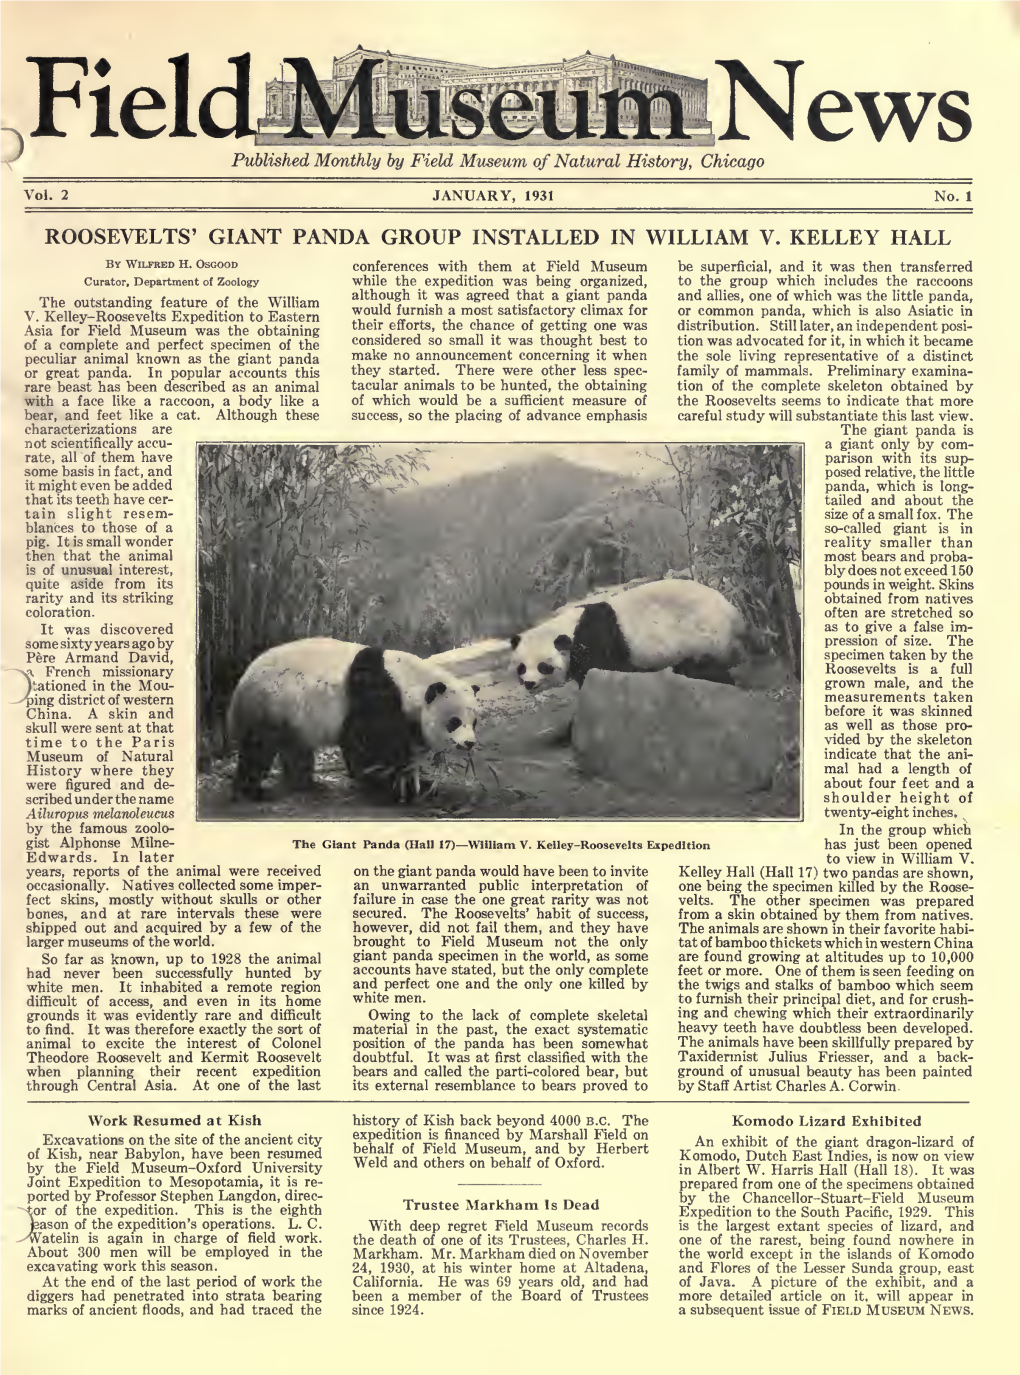 Roosevelts' Giant Panda Group Installed in William V